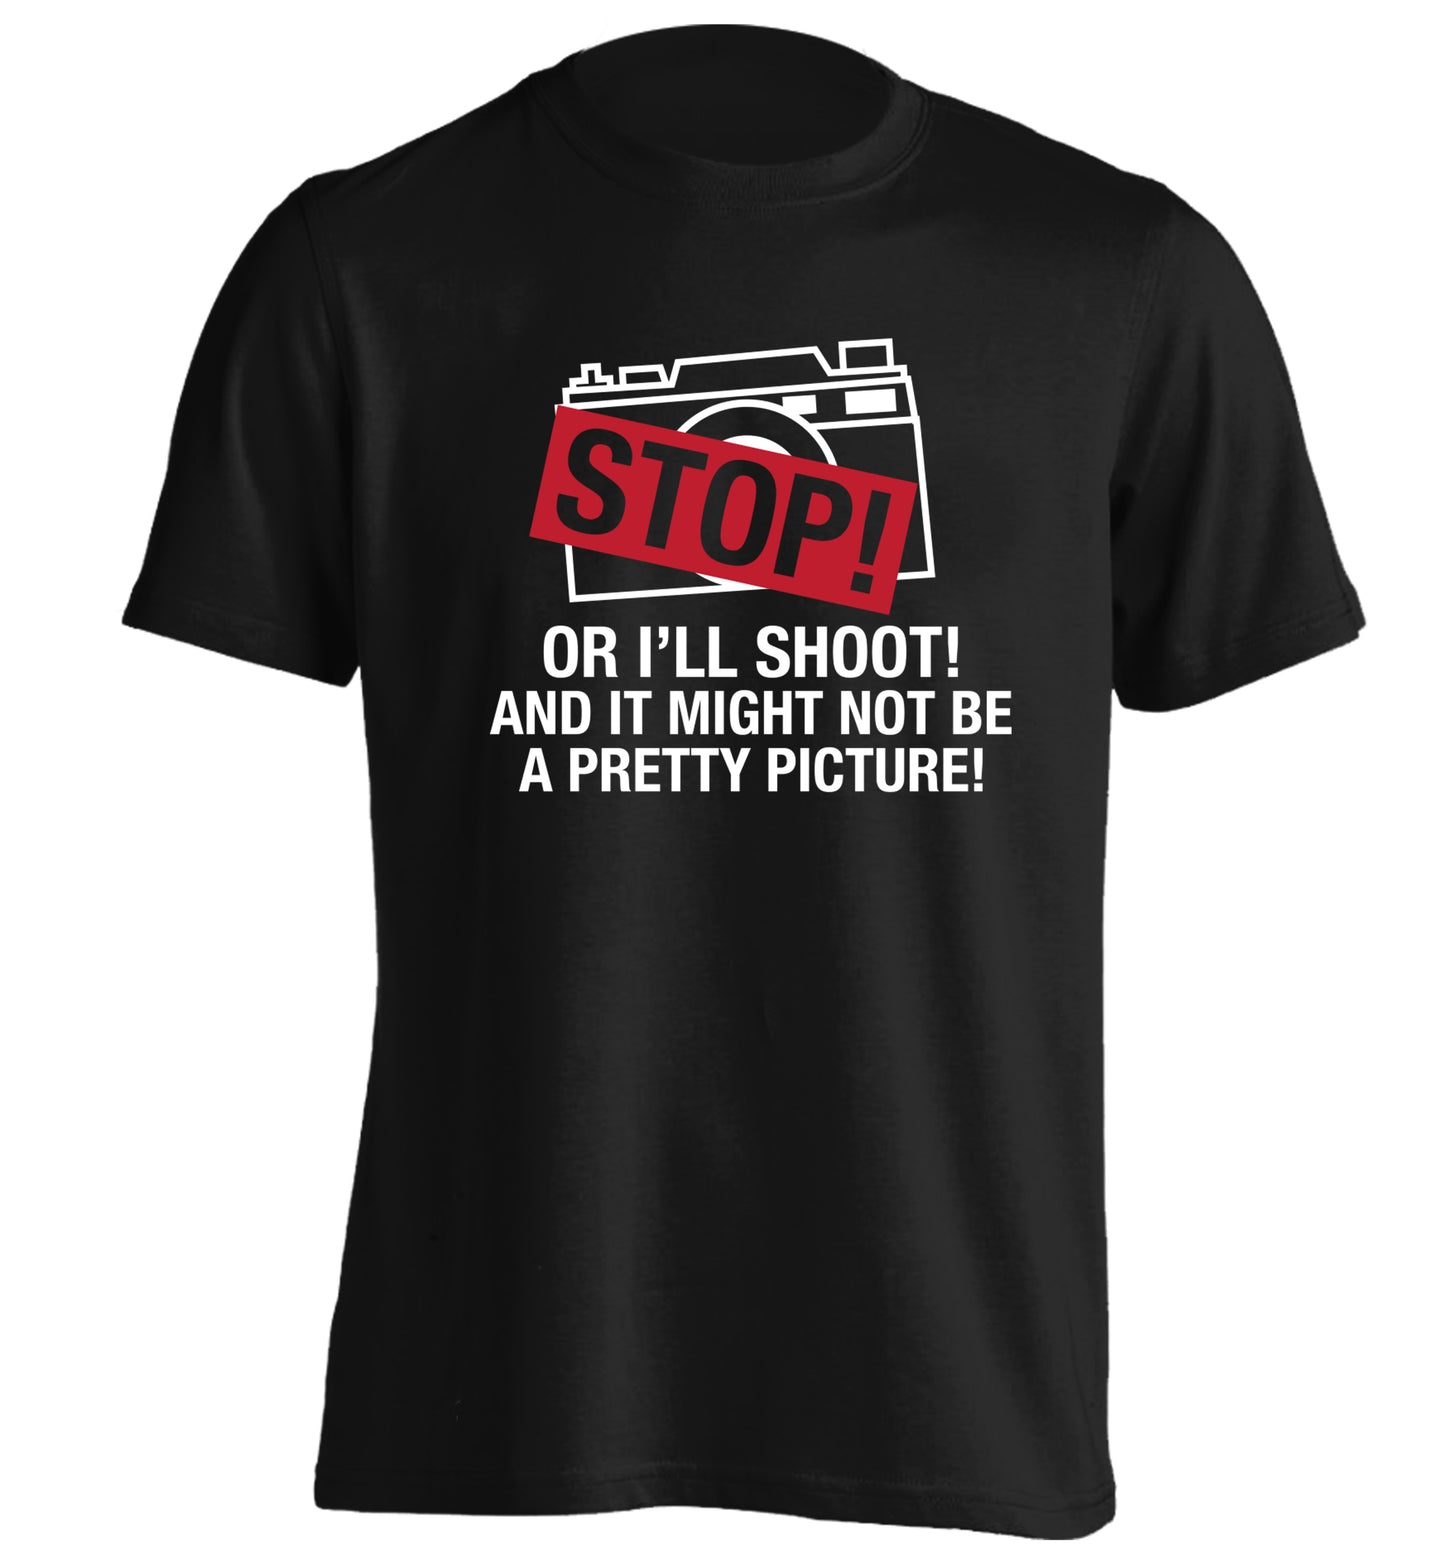 Stop or I'll shoot and it won't be a pretty picture adults unisex black Tshirt 2XL